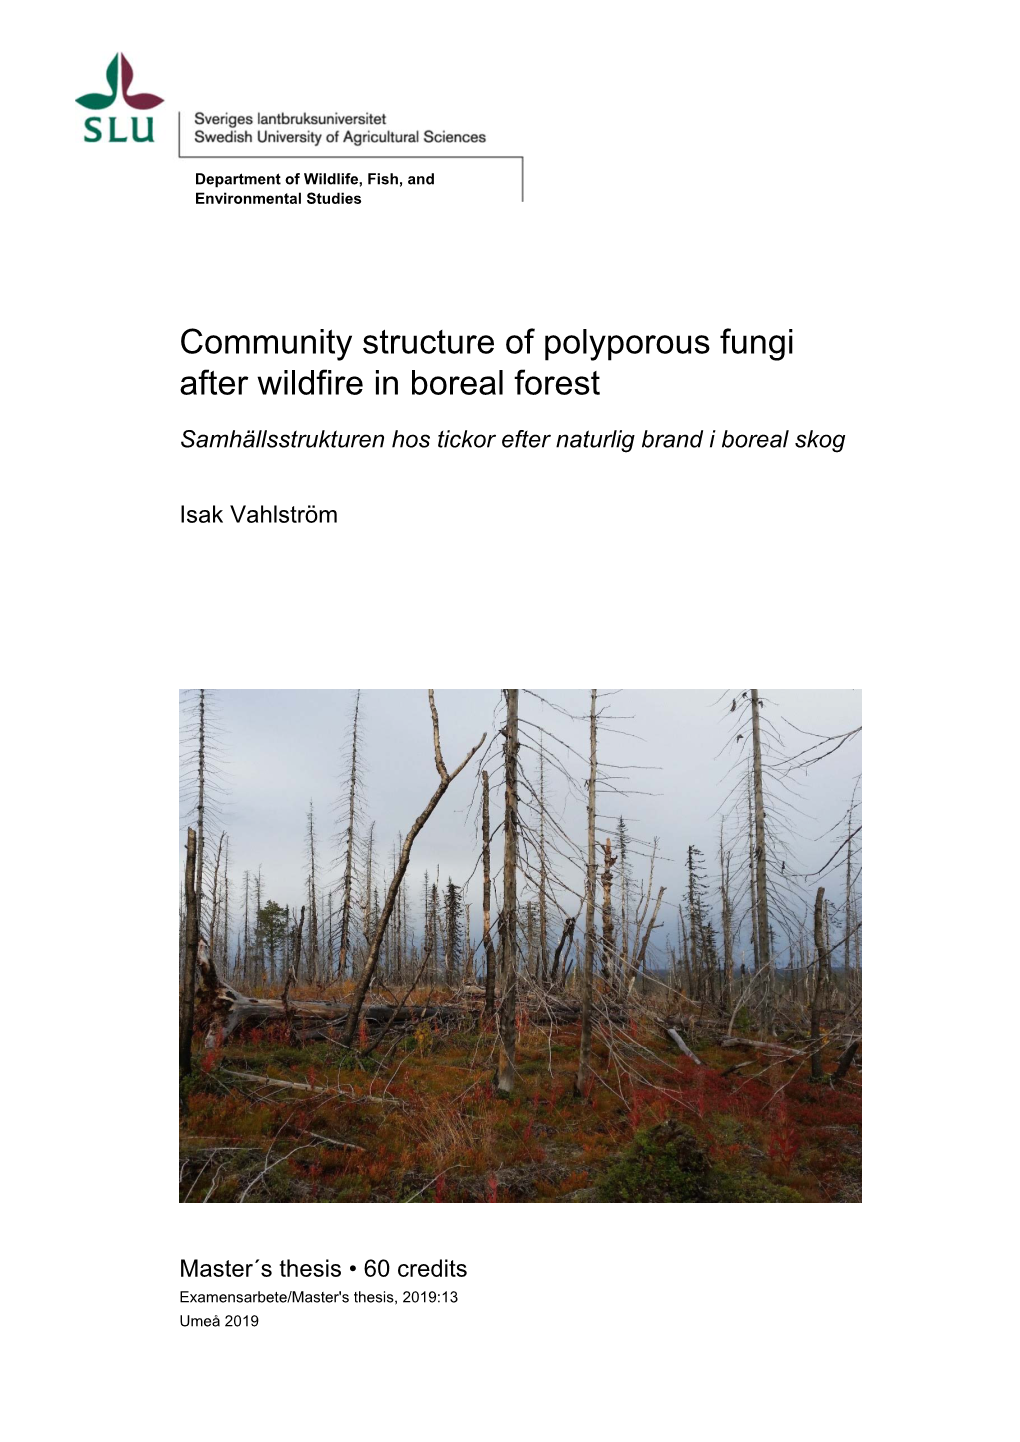 Community Structure of Polyporous Fungi After Wildfire in Boreal Forest